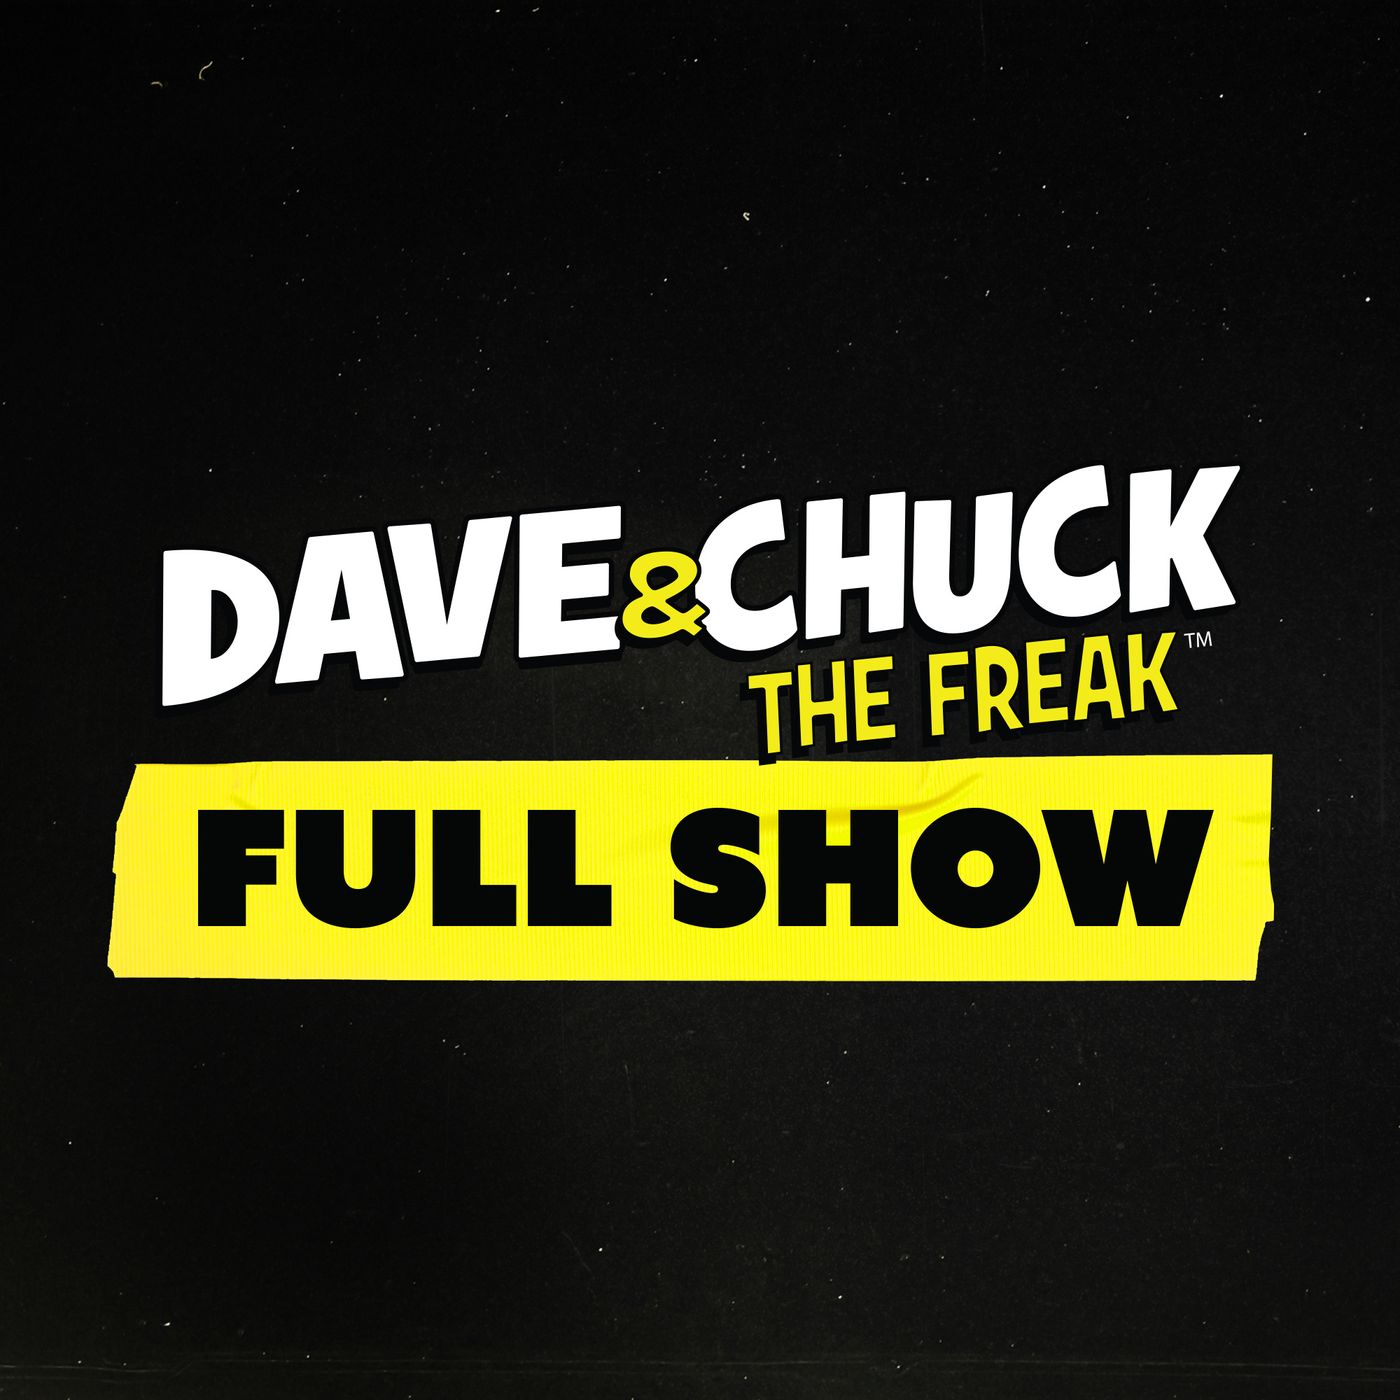 Friday, May 26th 2023 Dave & Chuck the Freak Full Show